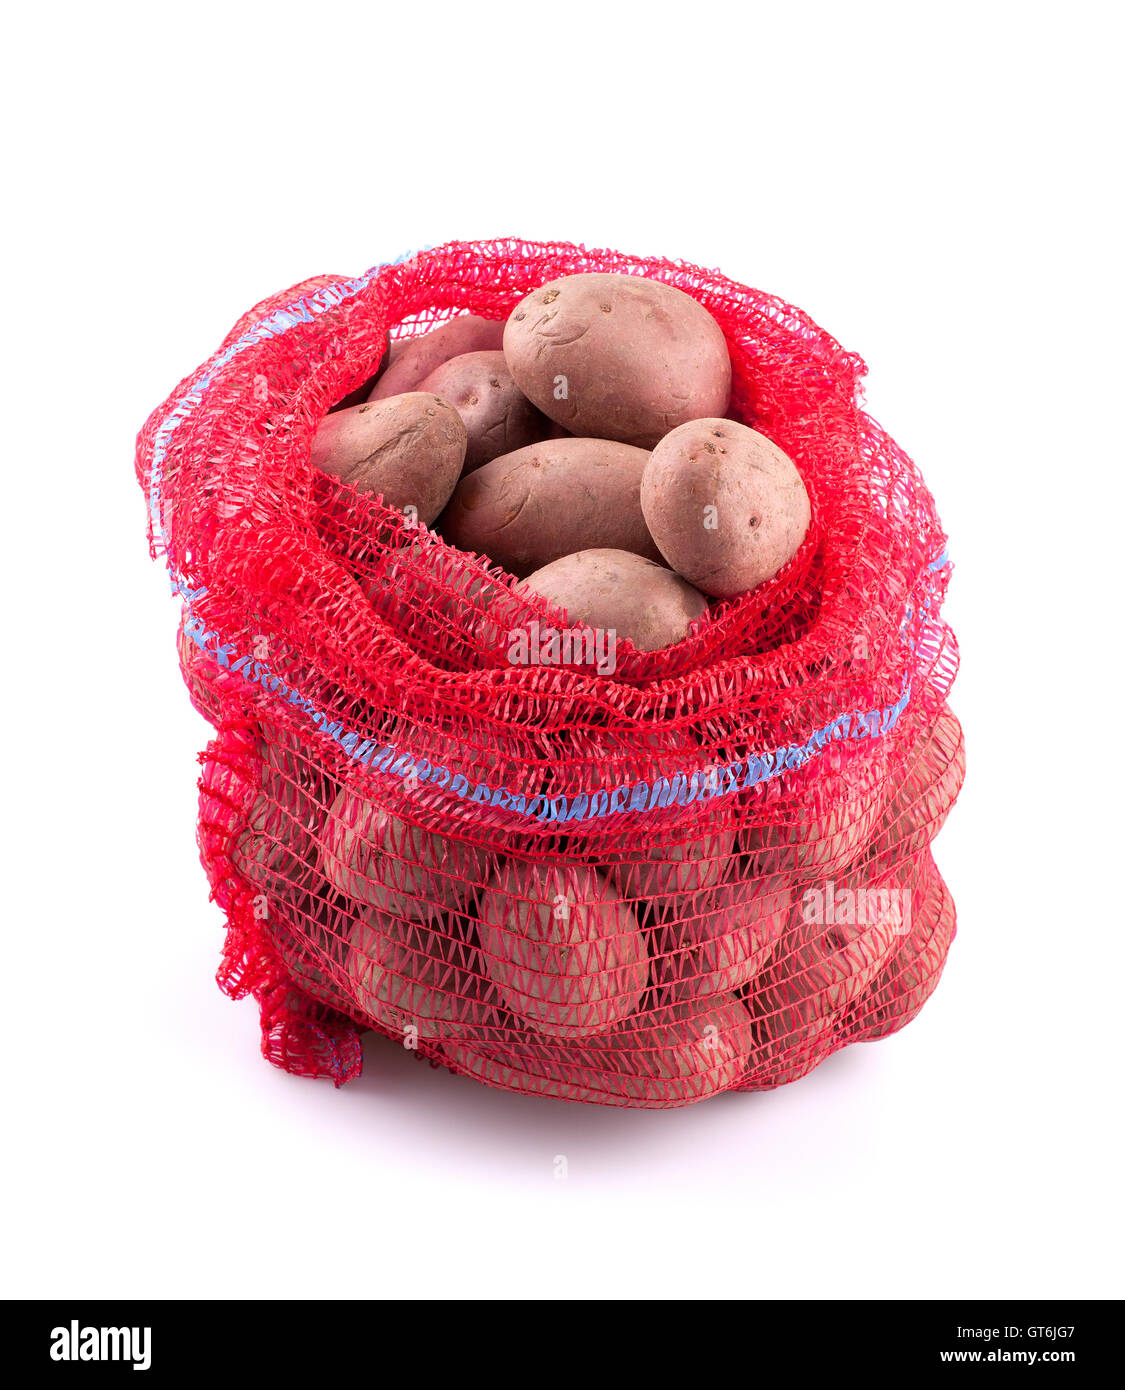 Bag of potatoes Cut Out Stock Images & Pictures - Alamy